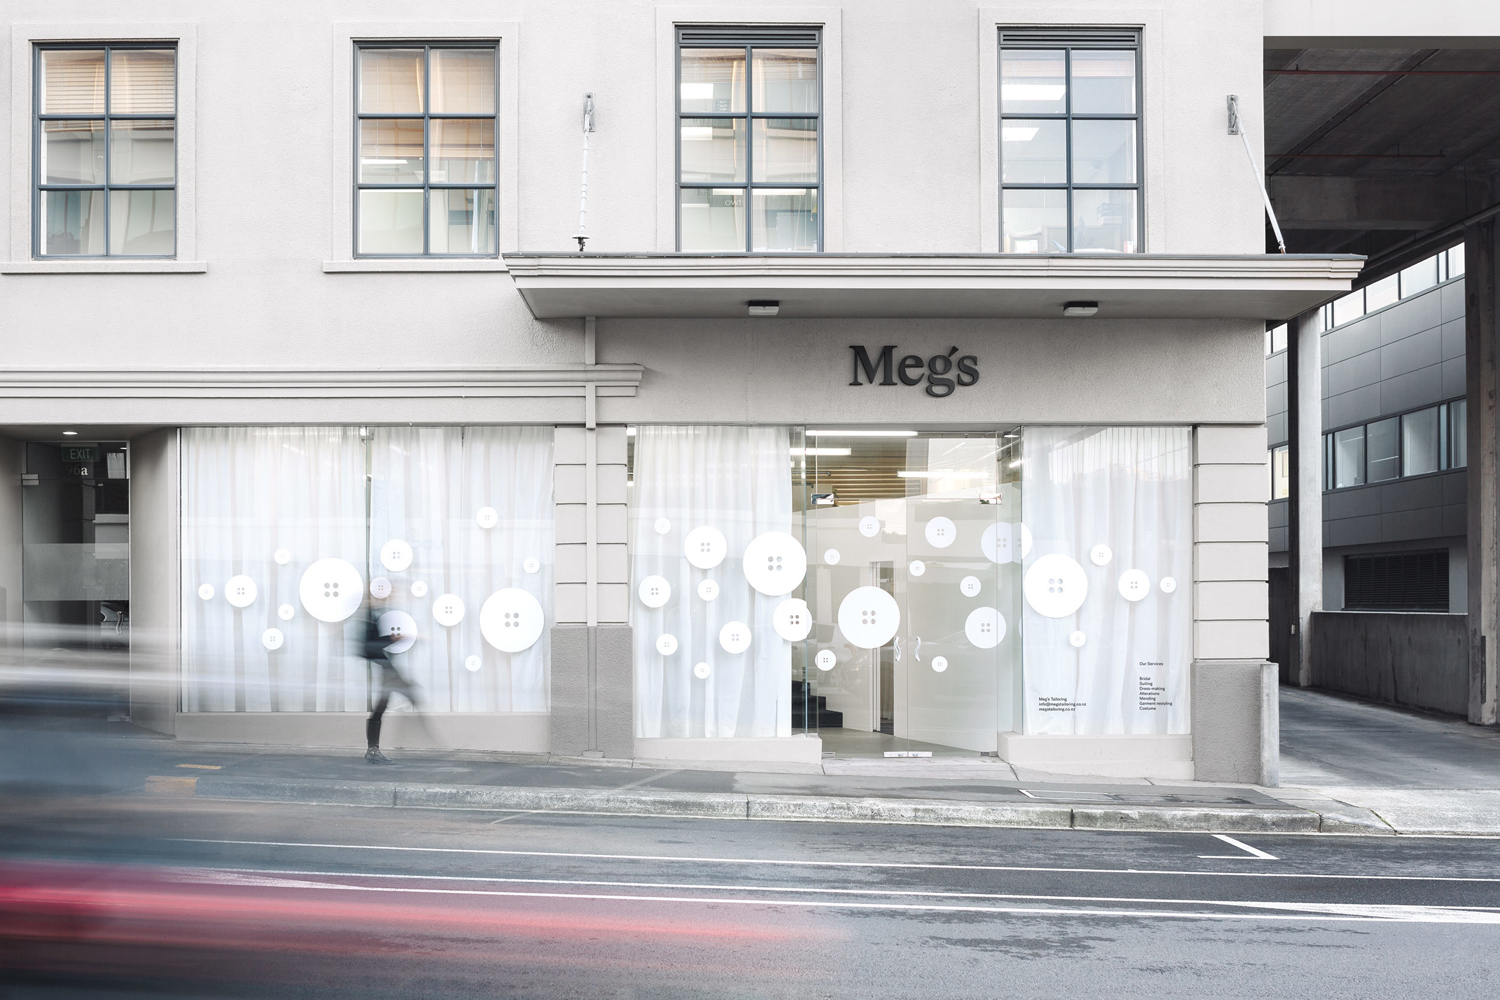 Brand identity and exterior decals and signage by Auckland-based Studio South for New Zealand tailoring service Meg's